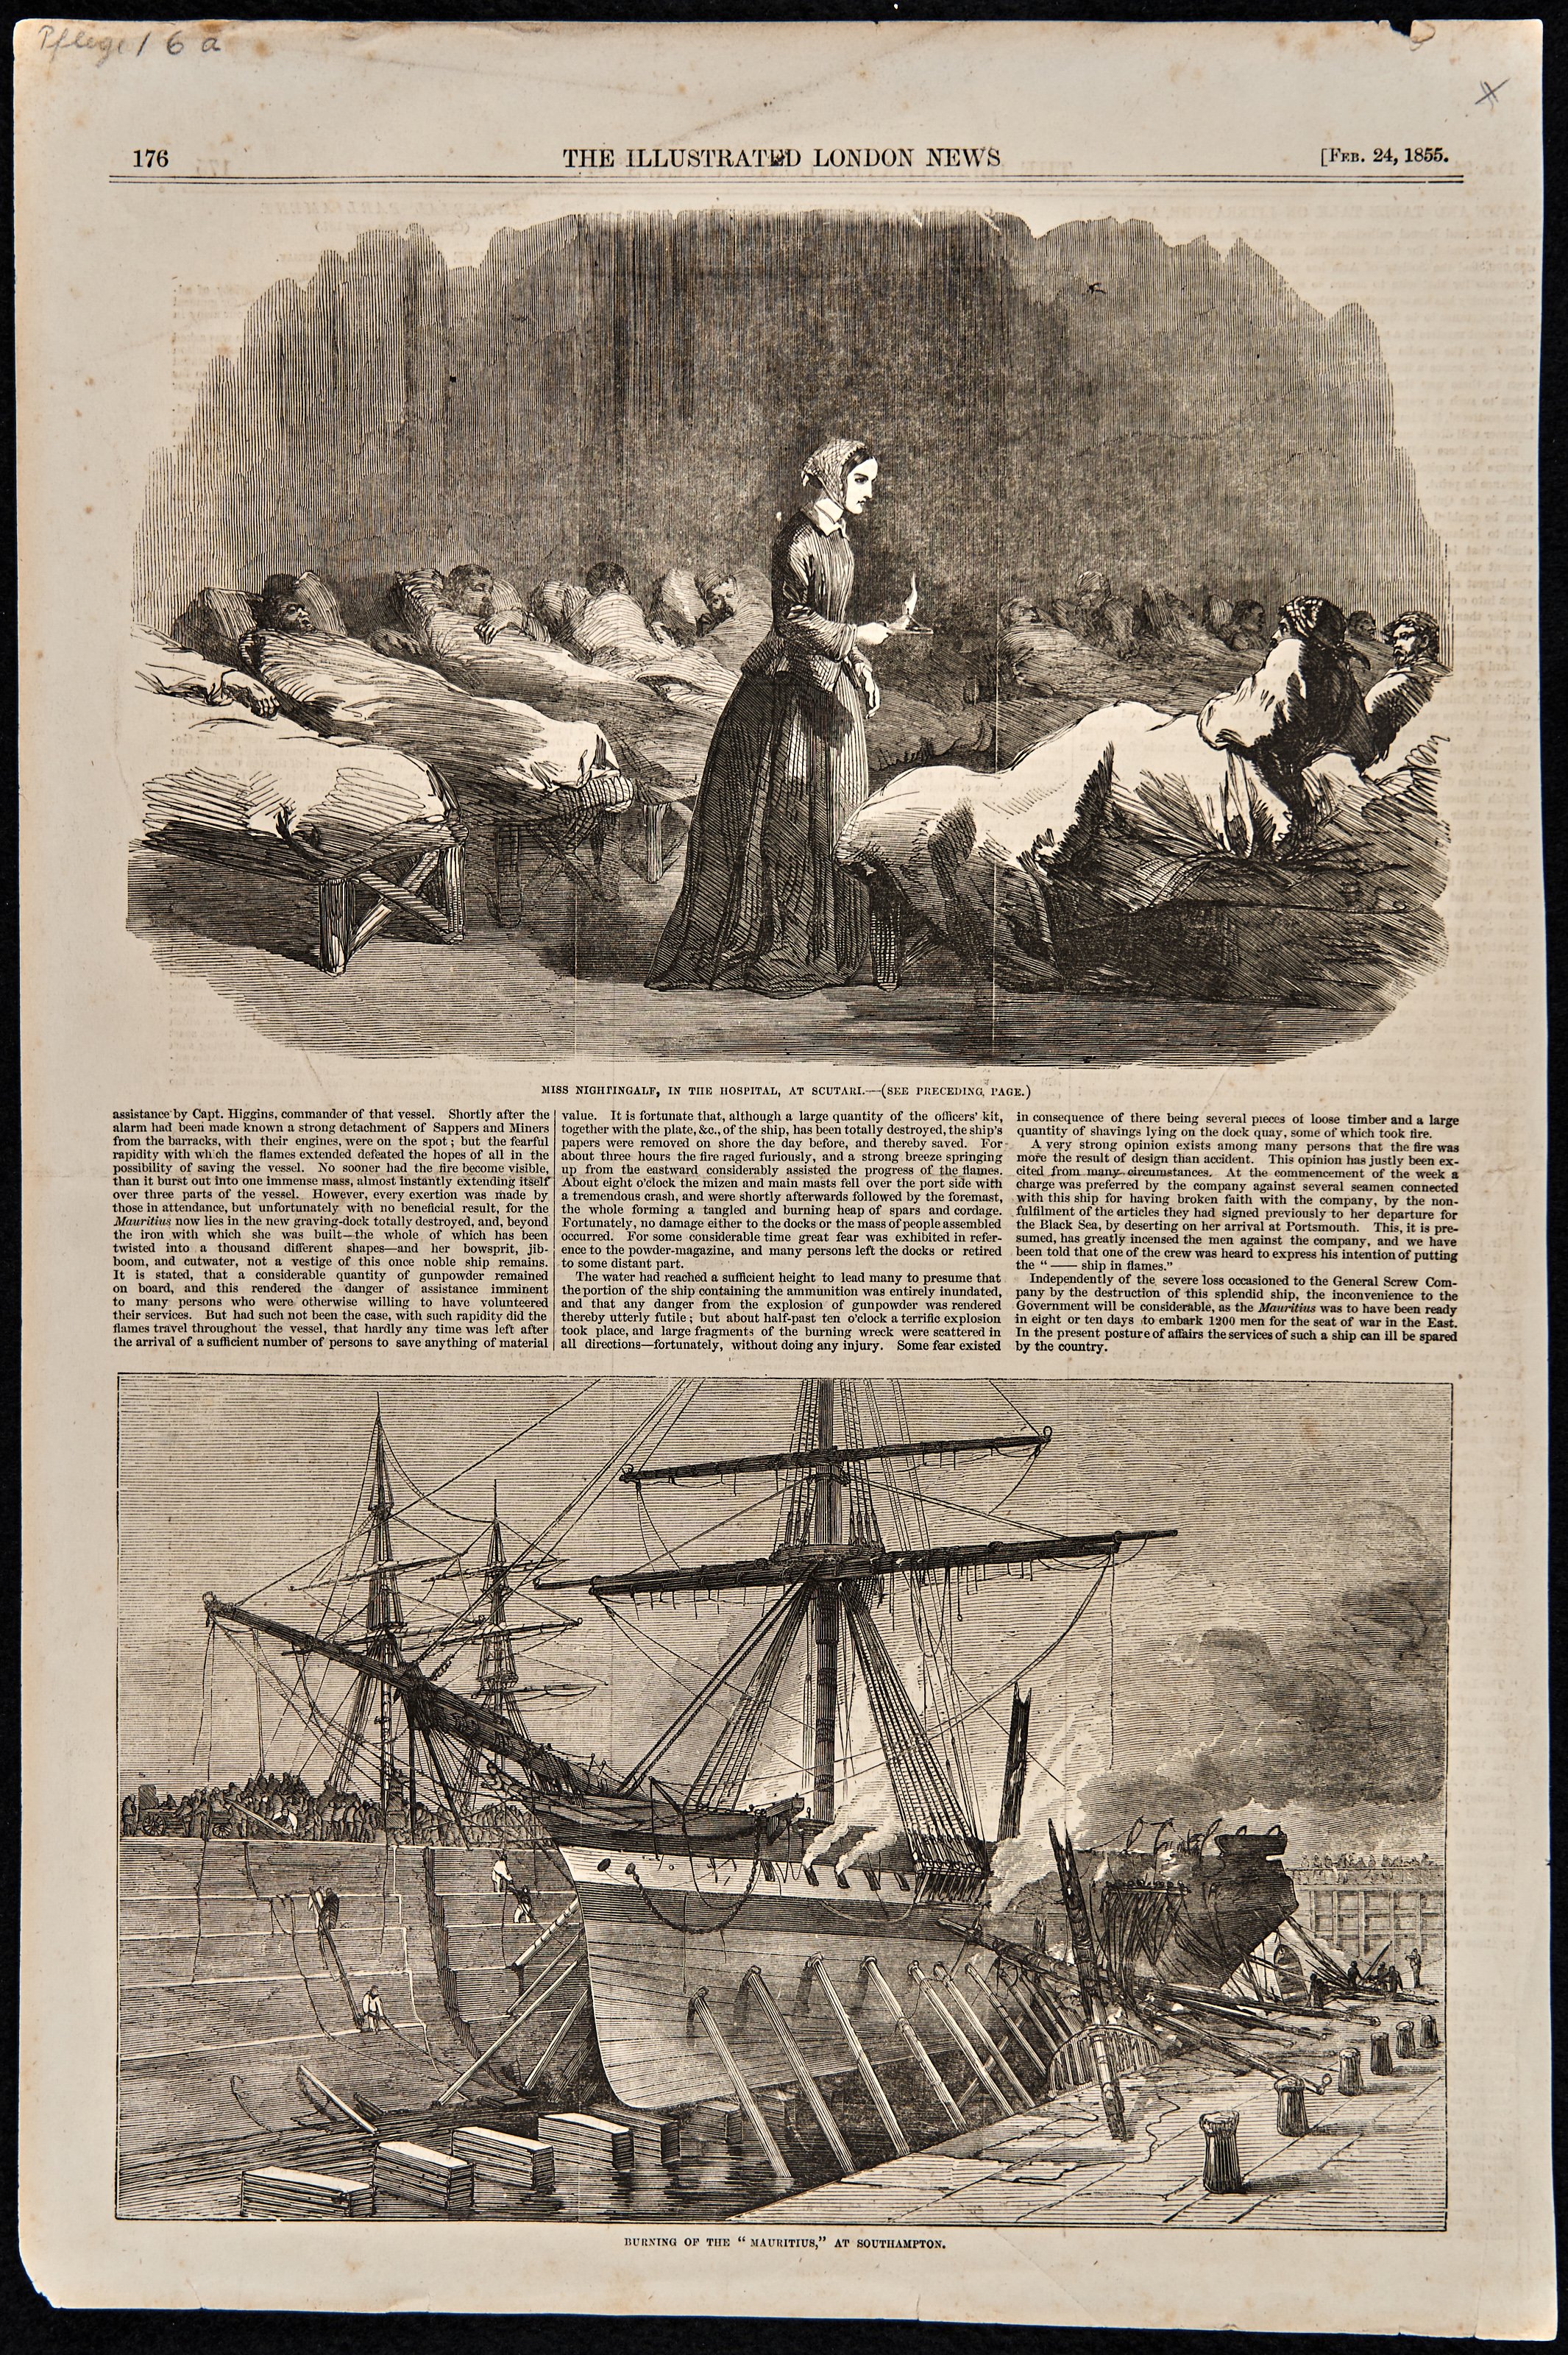 The Illustrated London News: Miss Nightingale at the Hospital (Wilhelm-Fabry-Museum CC BY-NC-SA)